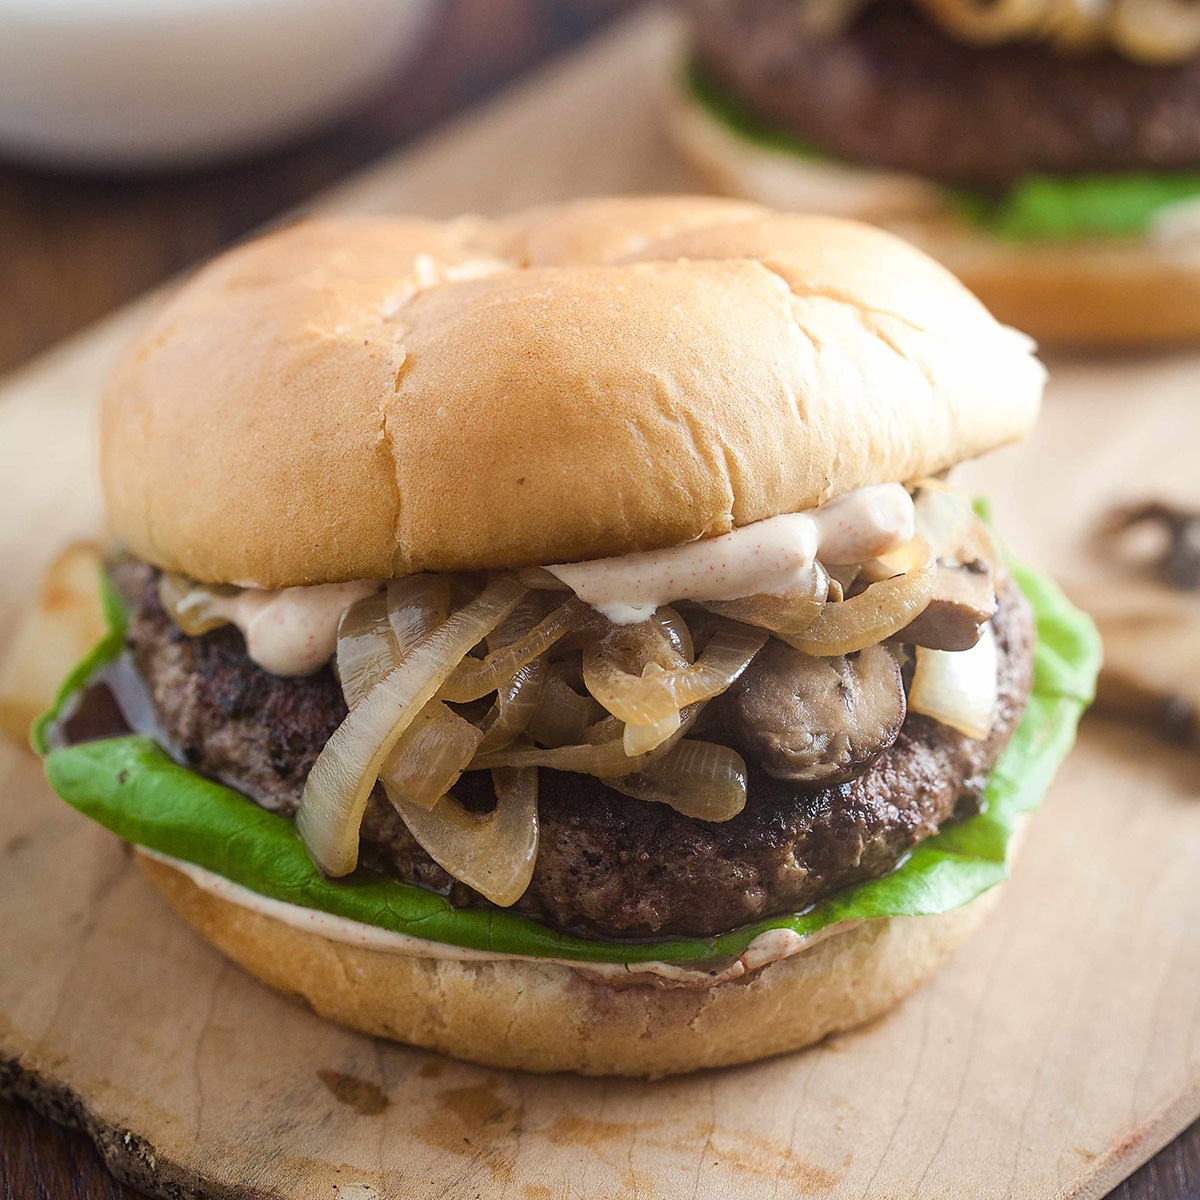 A burger with mushrooms and onions and lettuce on it.